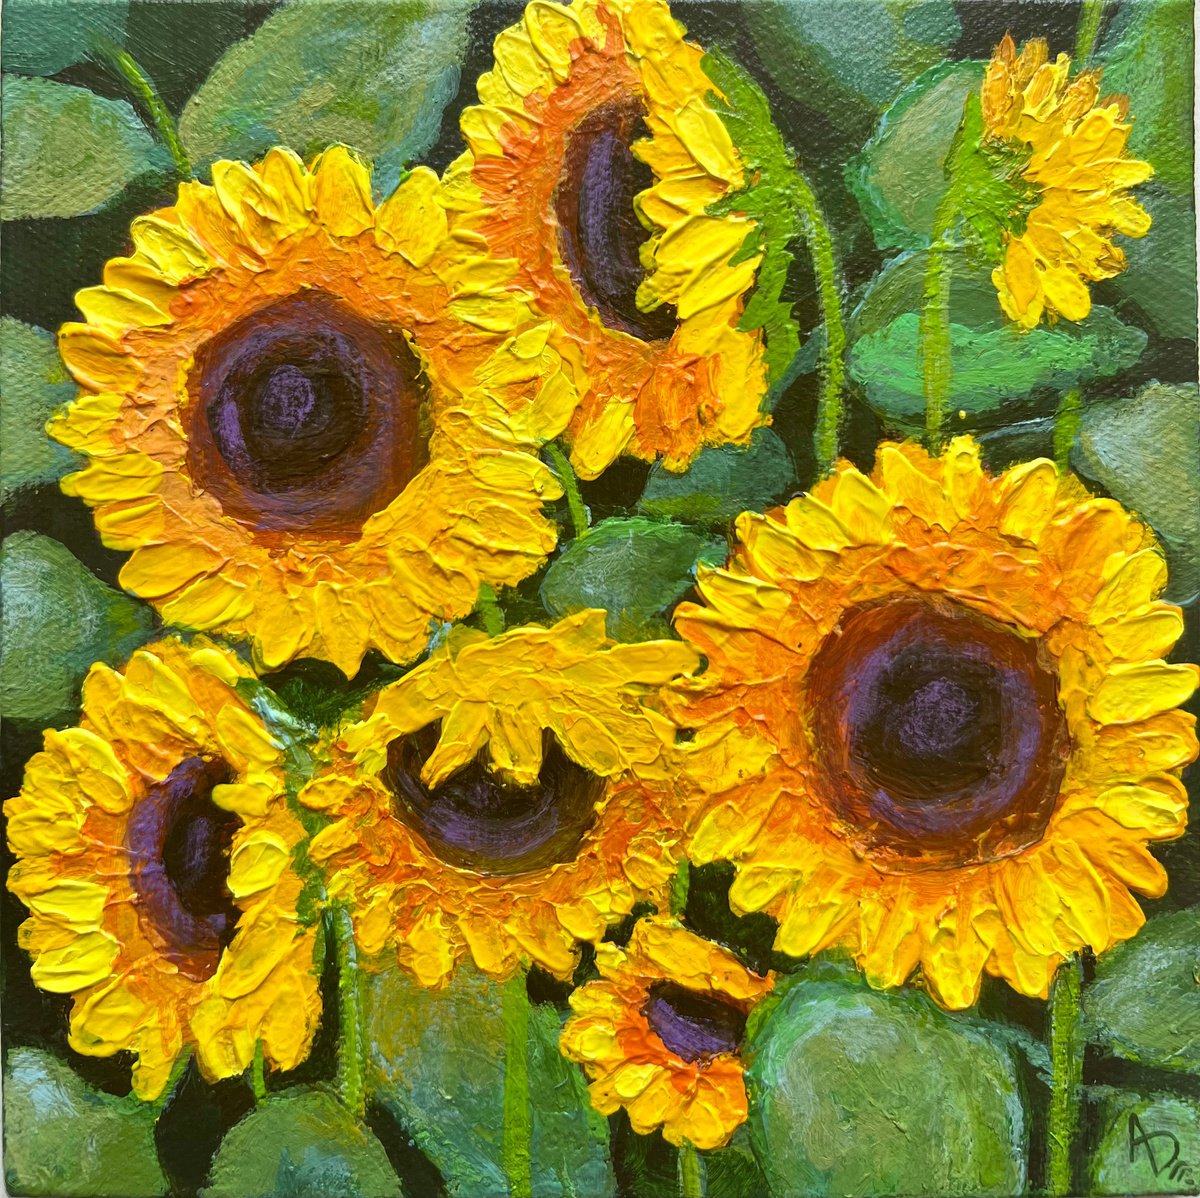 Sunflowers from the Garden by Amita Dand